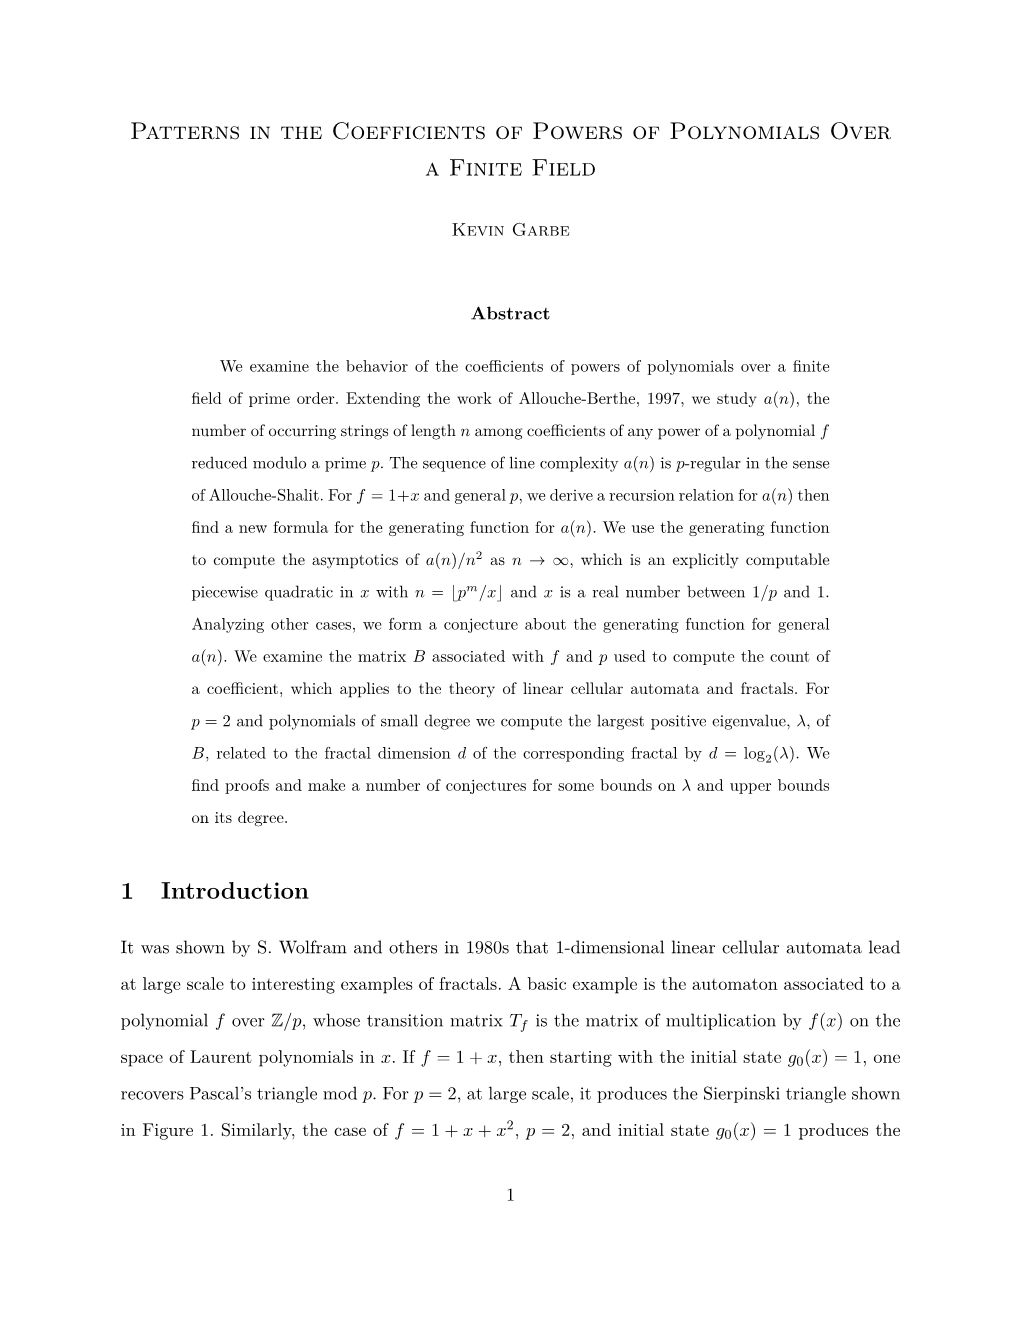 Patterns in the Coefficients of Powers of Polynomials Over a Finite Field 1 Introduction